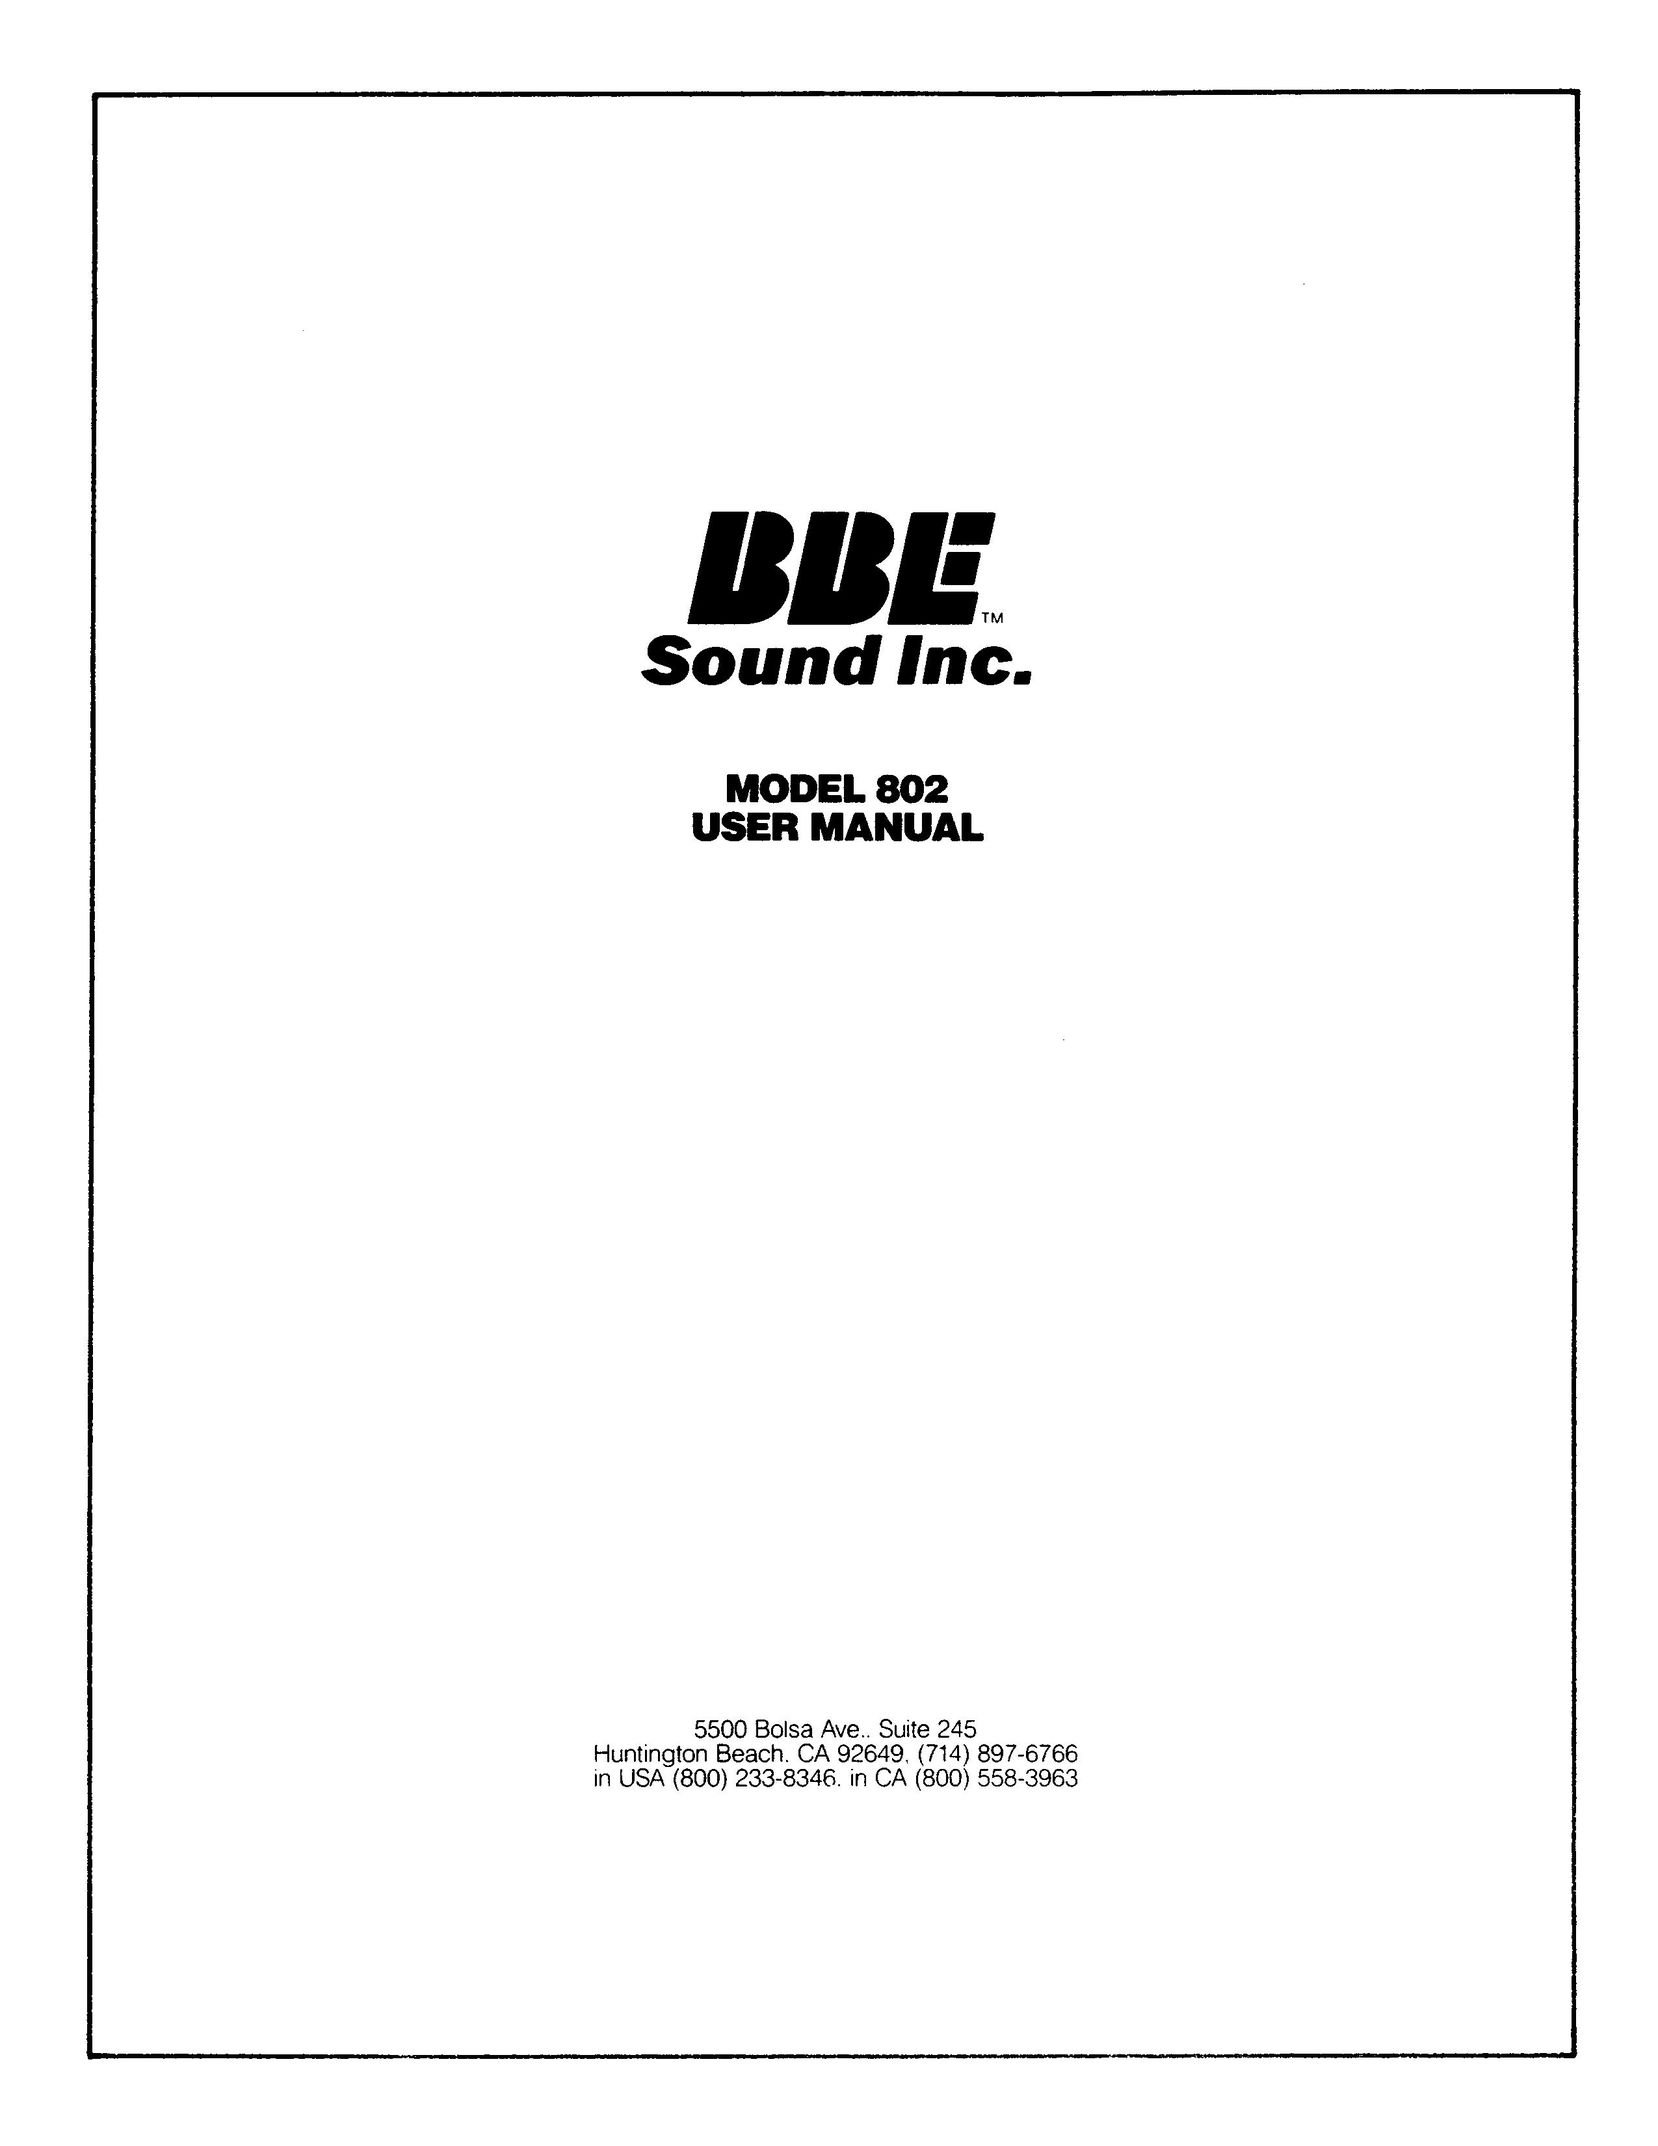 BBE BBE 802 Stereo Amplifier User Manual